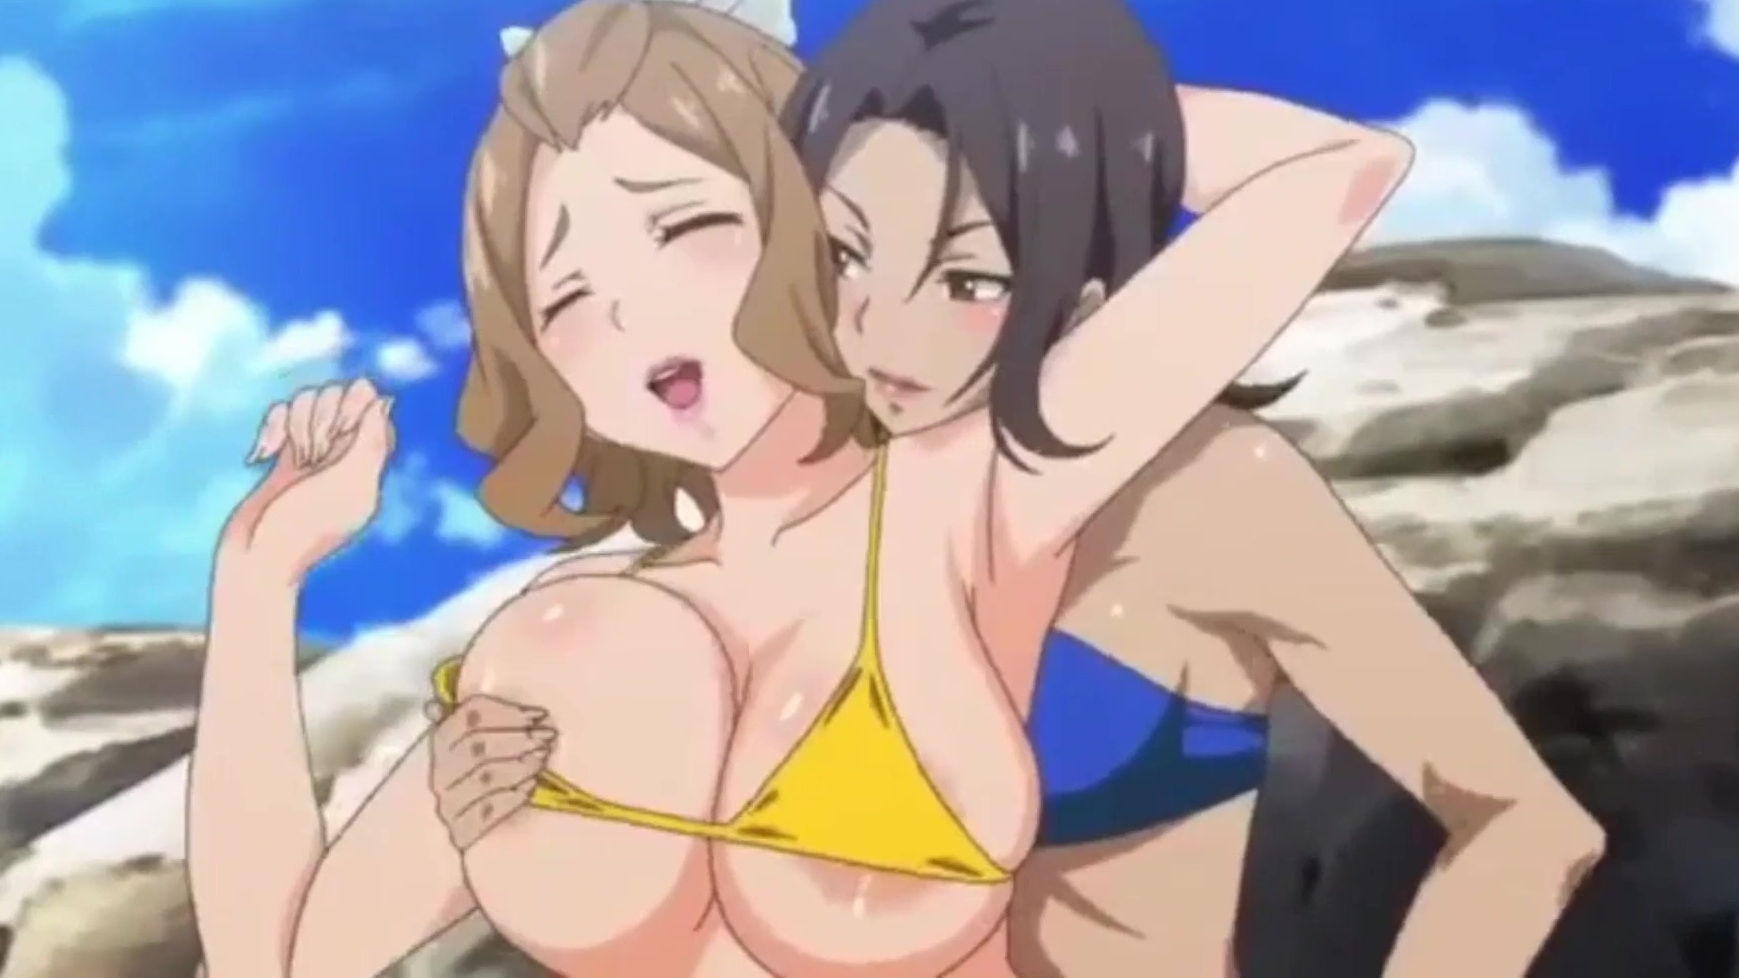 Lesbians Getting Anal Hentai Uncensored - Hentai Compilation of Busty, Tits-crazy, Lesbian Valkyries